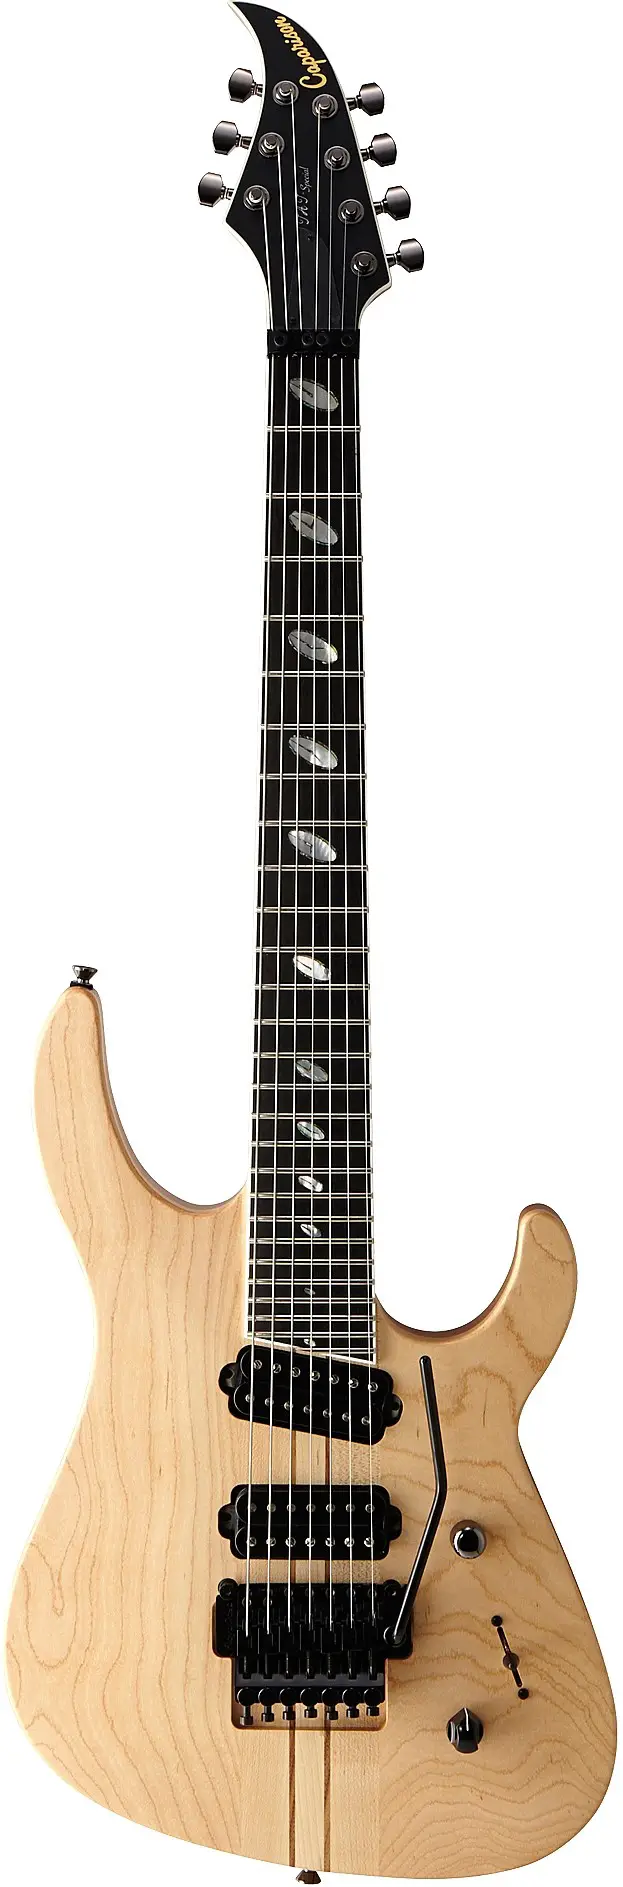 TAT Special 7 by Caparison